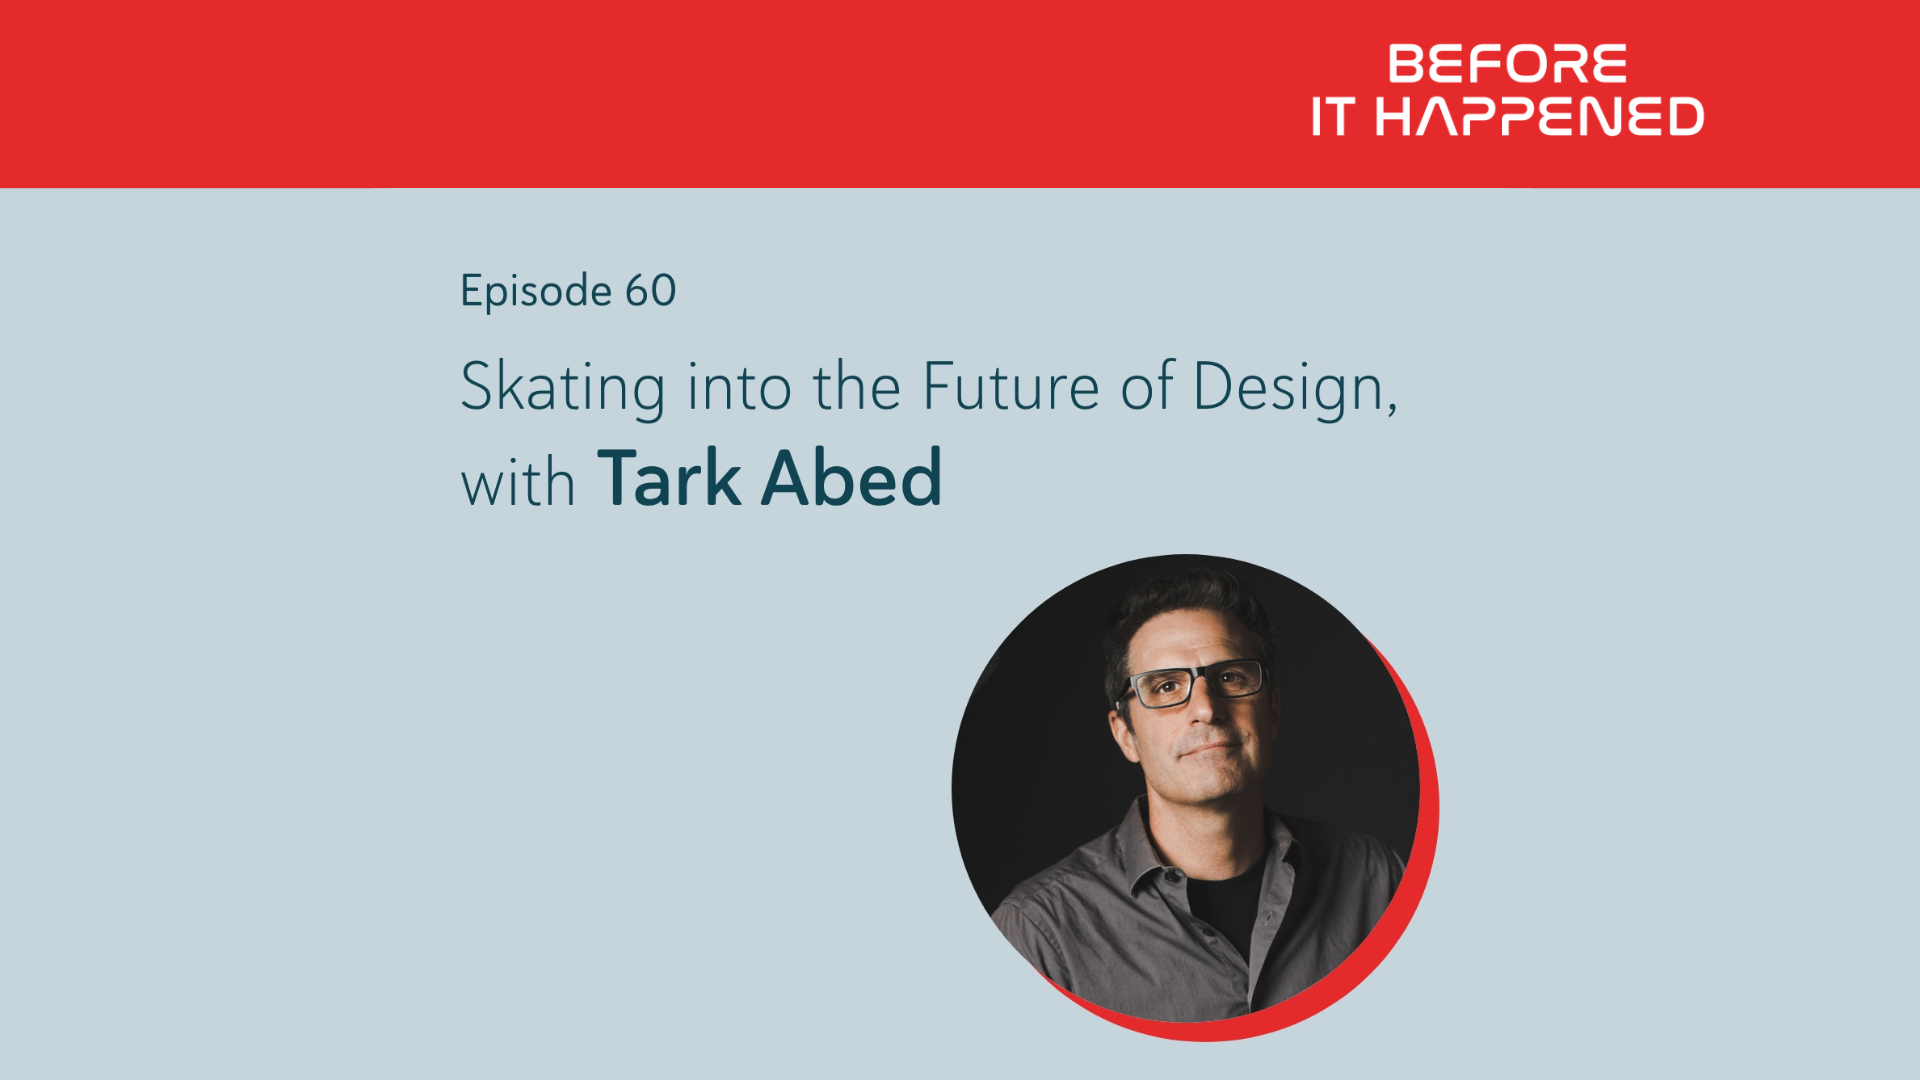 WHERE IT ALL BEGAN: INTERVIEW WITH OUR FOUNDER,TARK ABED